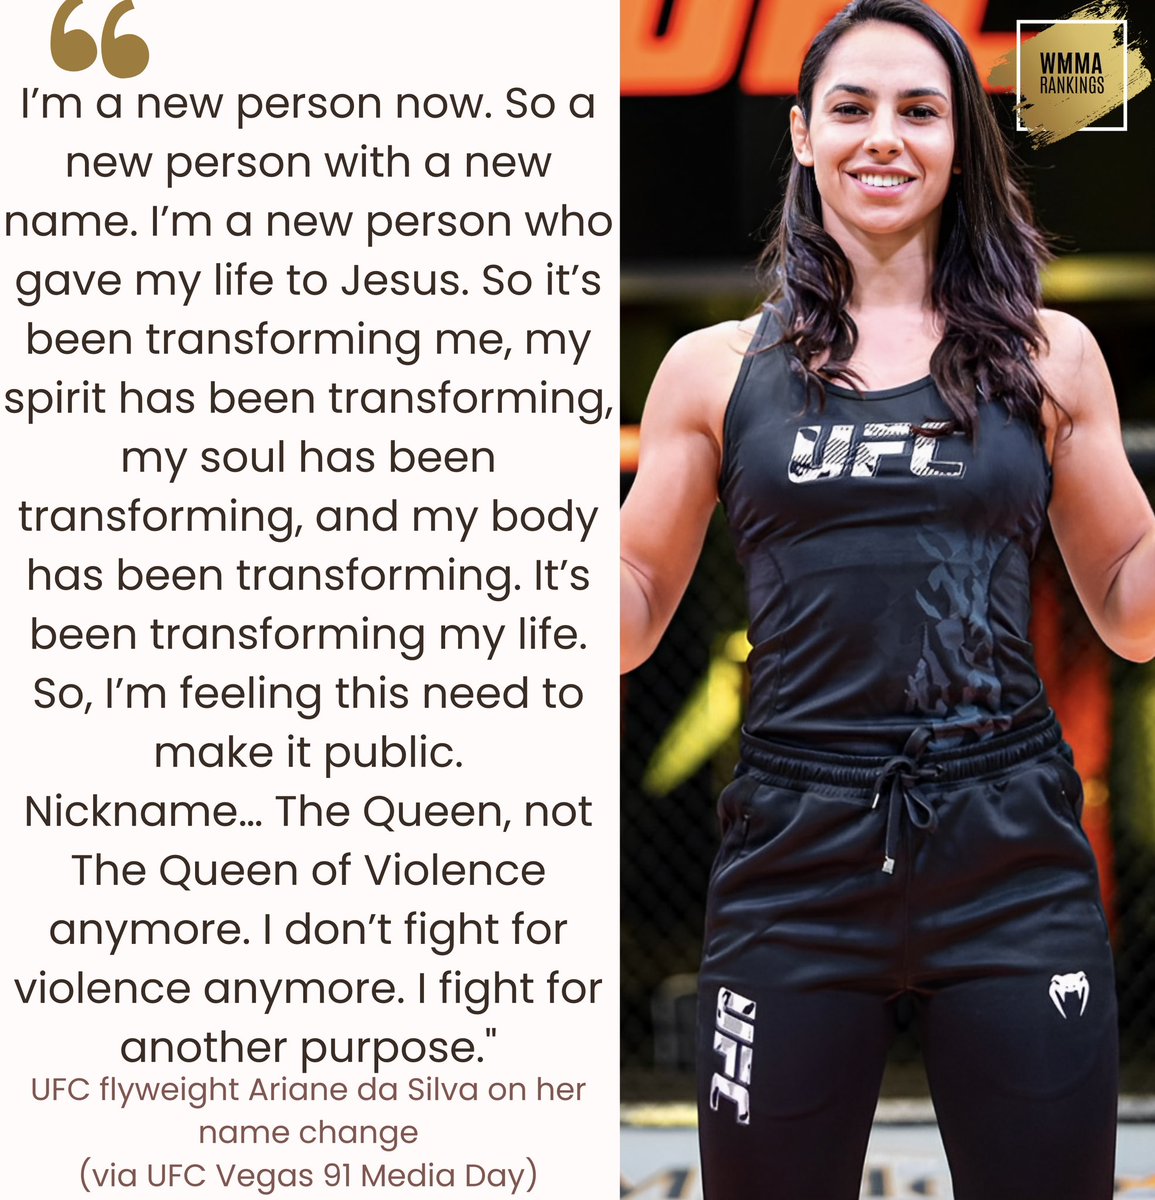 No longer 'The Queen of Violence' or Ariane Lipski! 12 ranked flyweight 🇧🇷 Ariane da Silva explains her decision to go by a name change as well as changing her nickname to 'The Queen' ahead of her fight this Saturday at #UFCVegas91 against Karine Silva. #WMMA #UFC